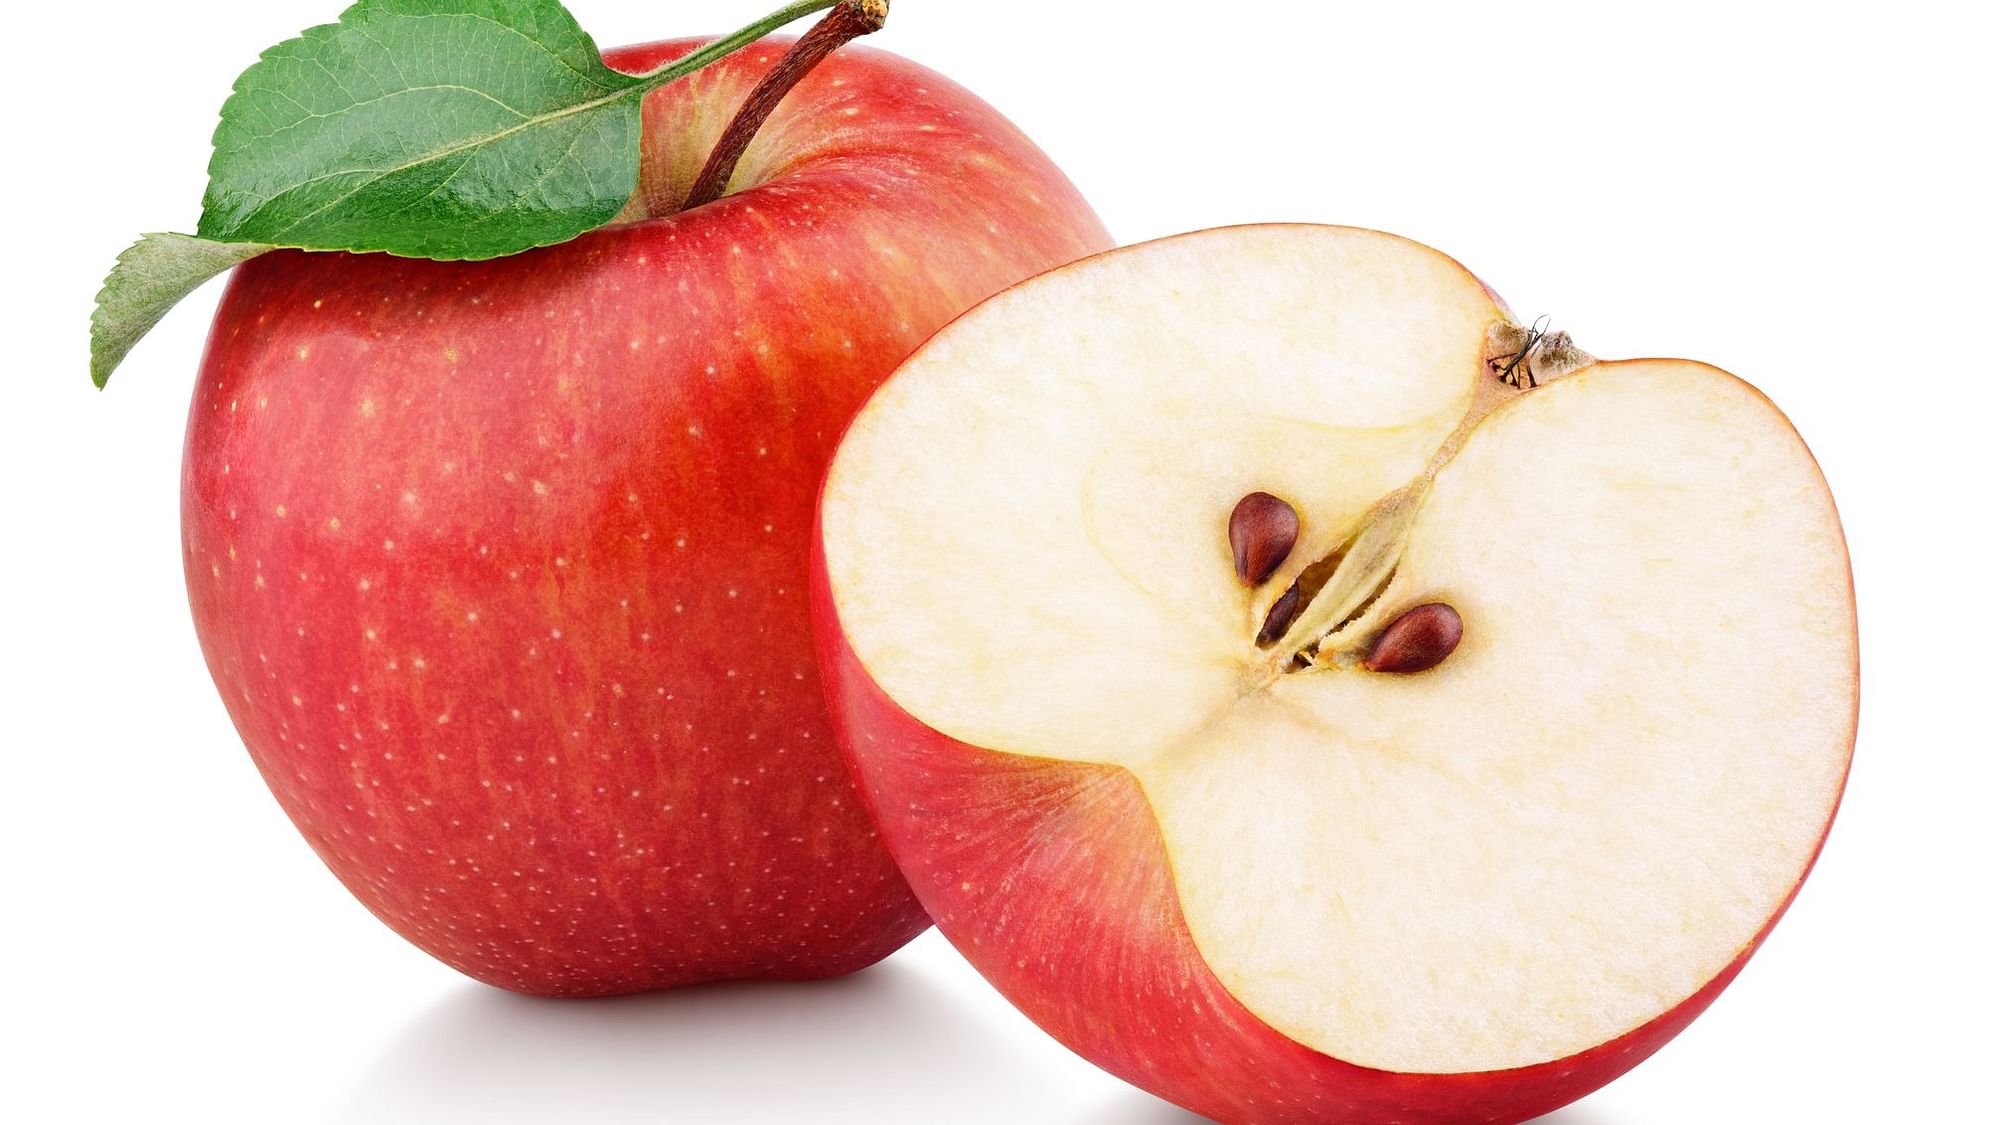 How about two apples a day to keep your heart healthy?